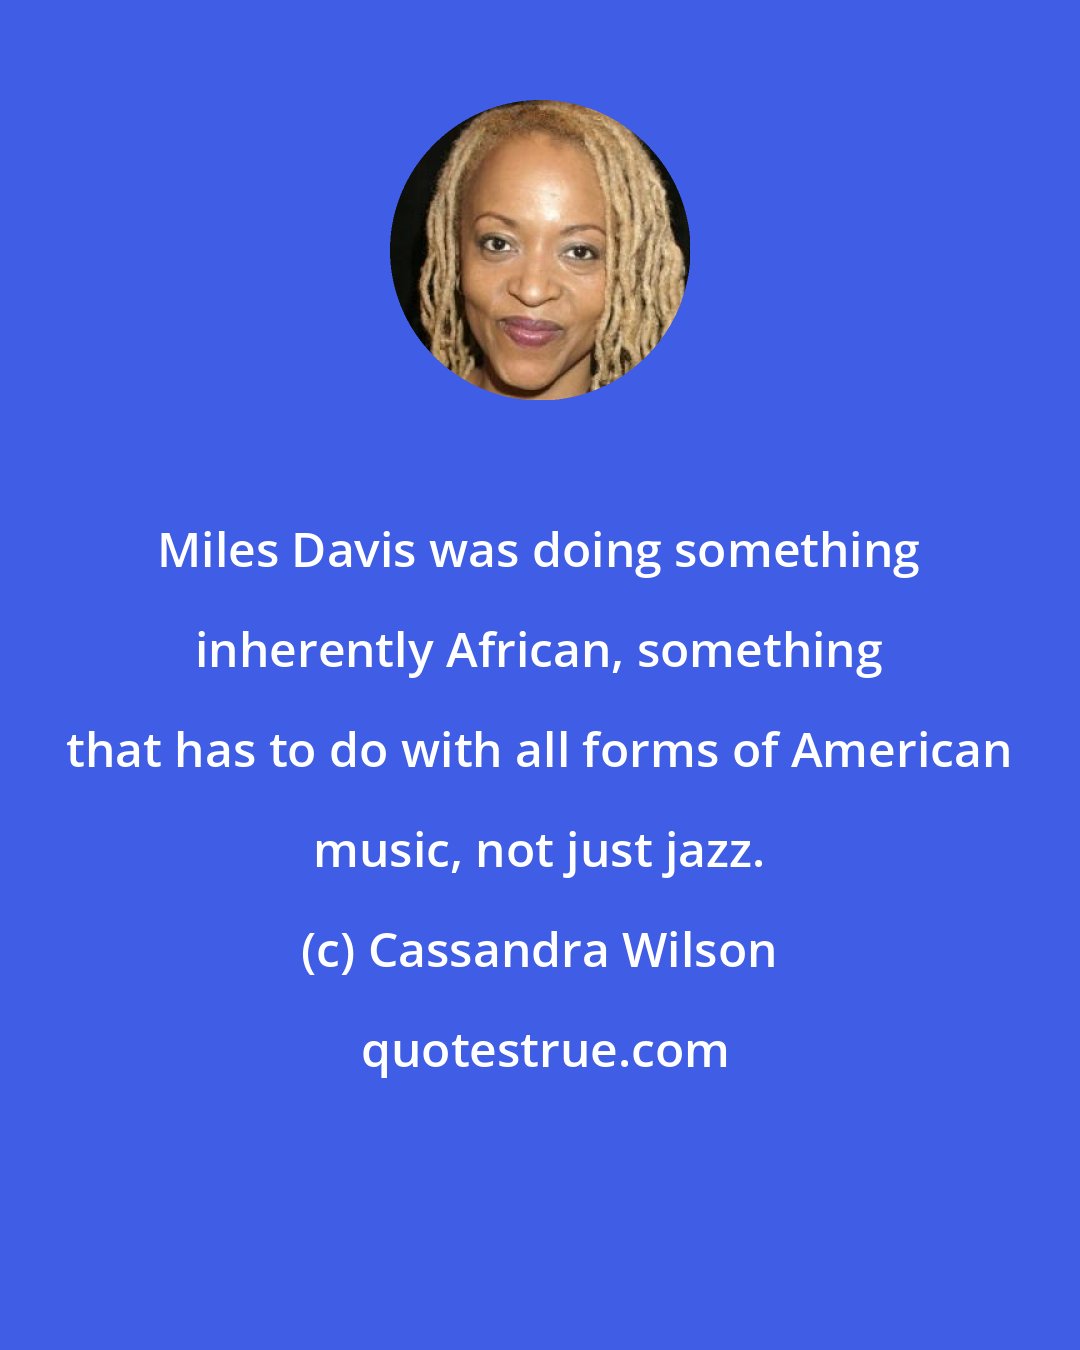 Cassandra Wilson: Miles Davis was doing something inherently African, something that has to do with all forms of American music, not just jazz.